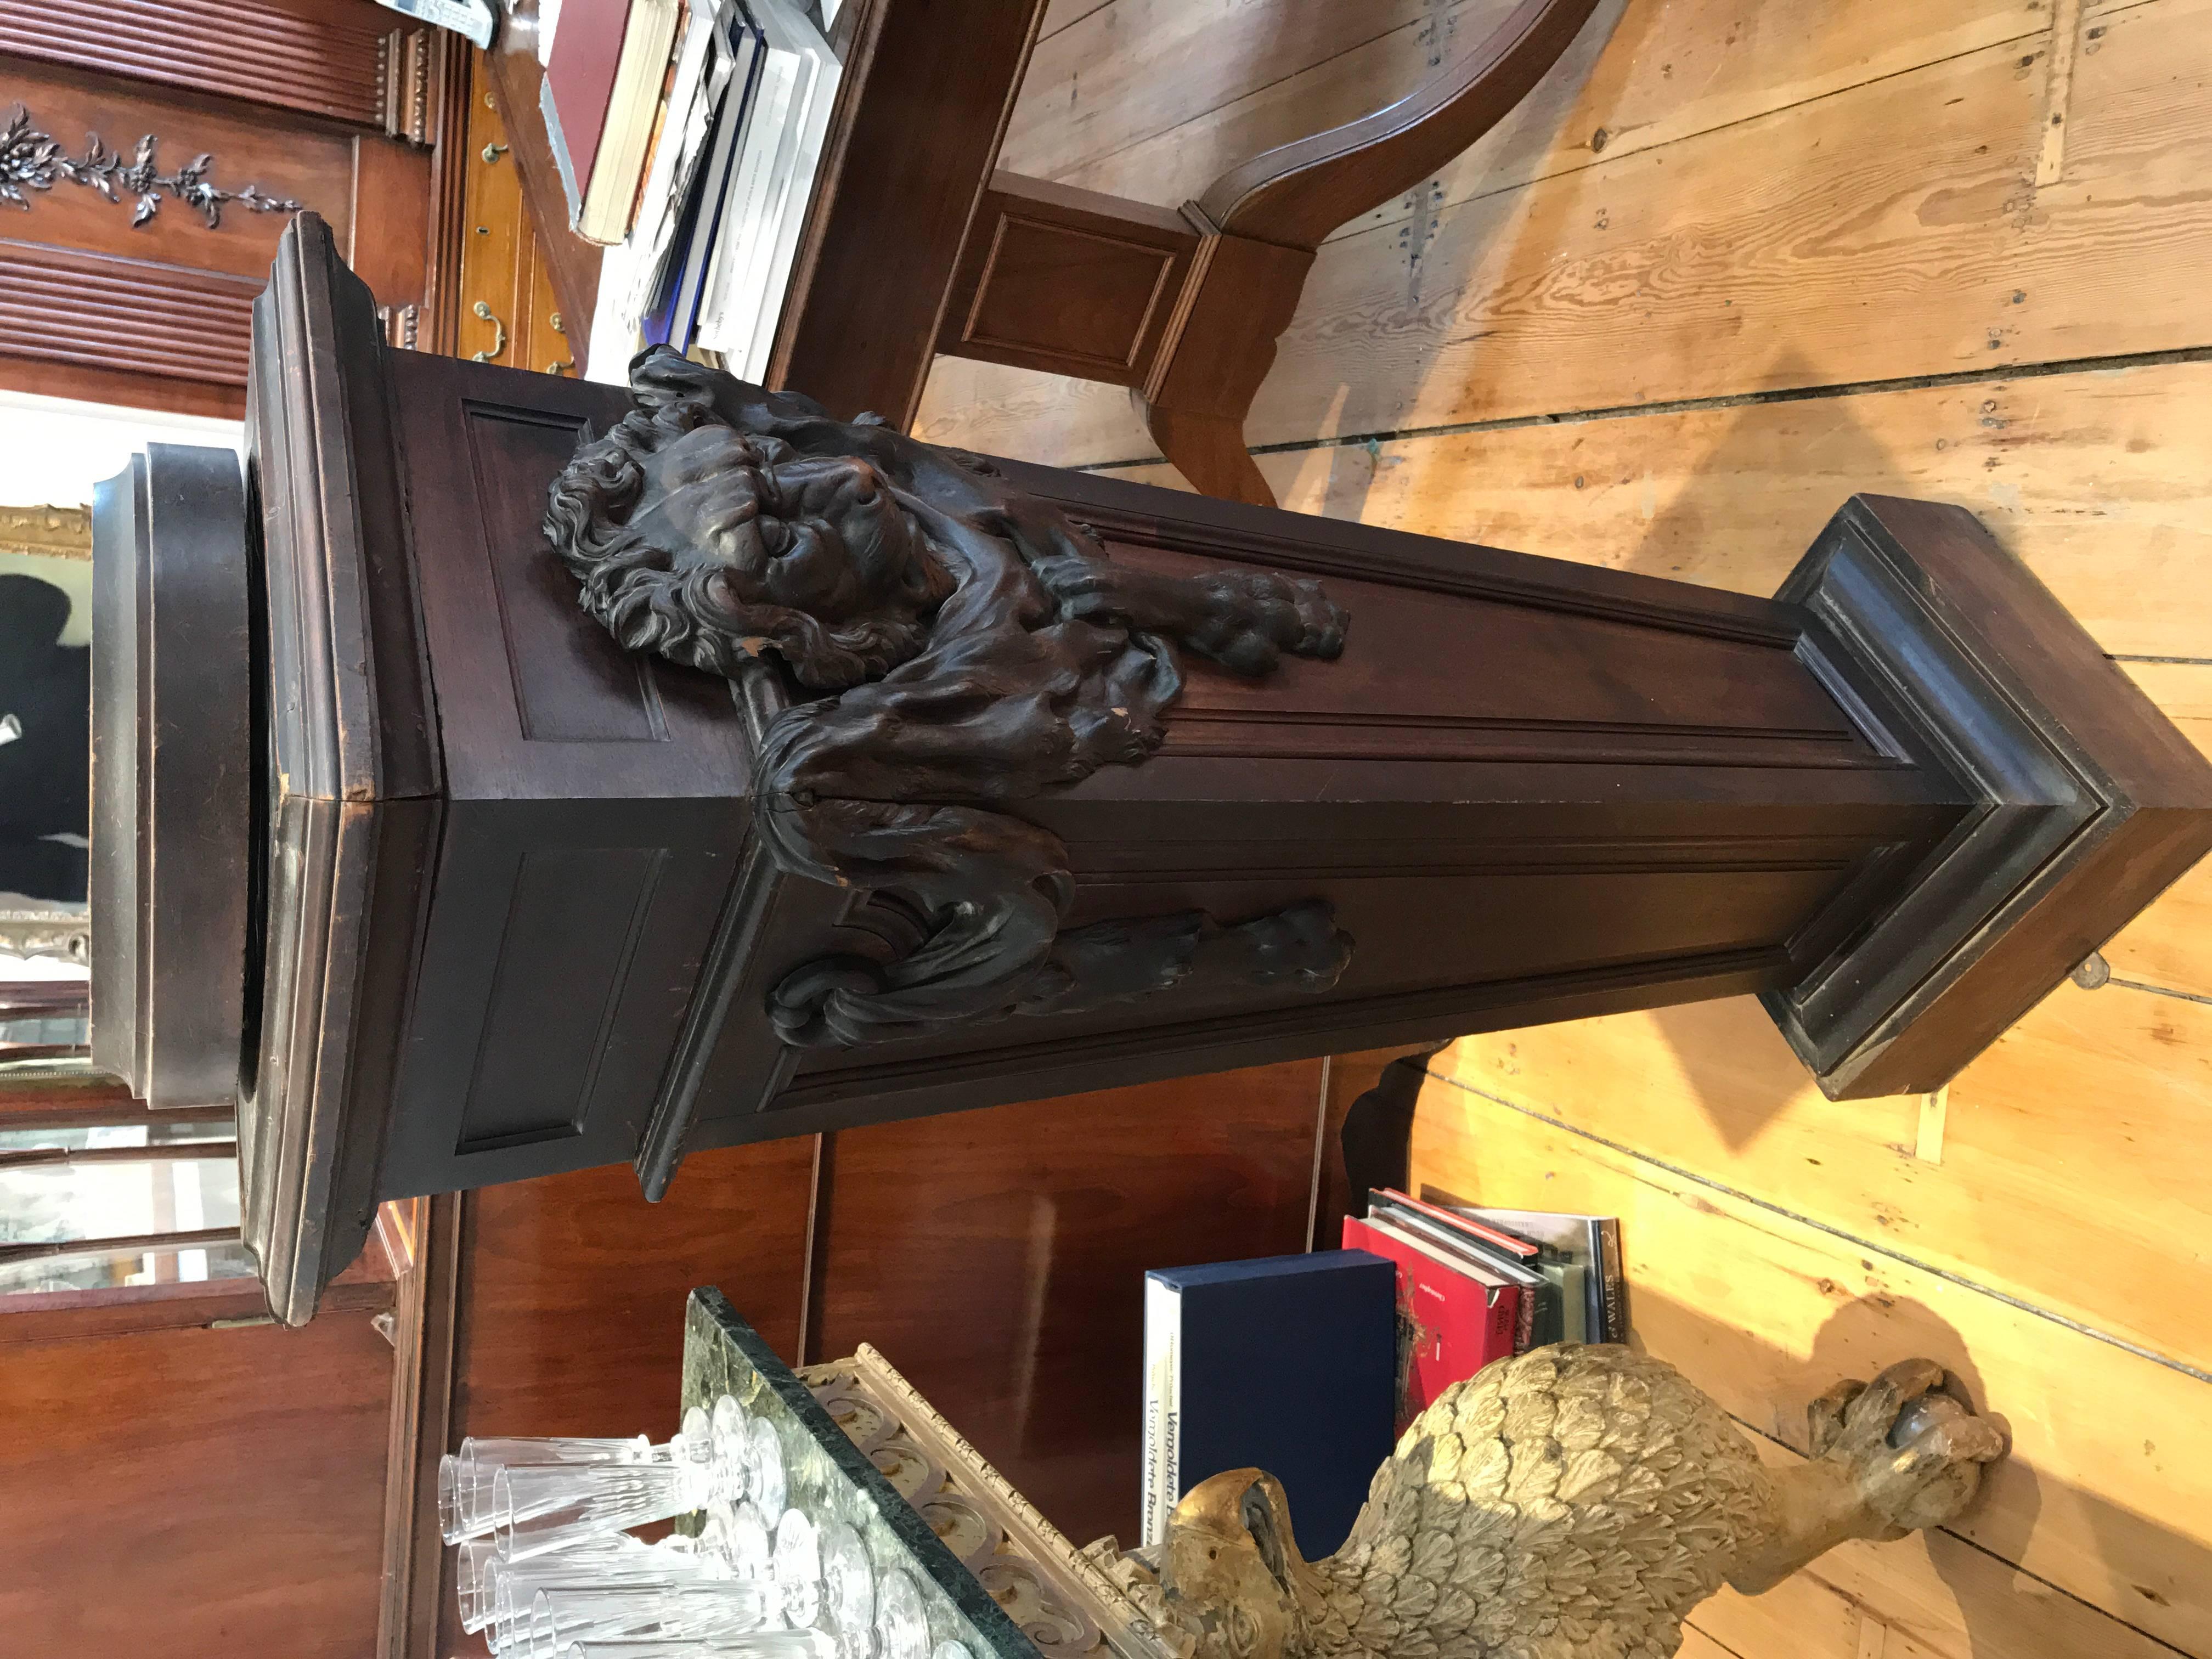 19th Century Walnut Pedestal

Victorian Tapered Paneled Form.  Carved Walnut Skin of the Nemean Lion Draped on three sides.  Top turns to move sculpture